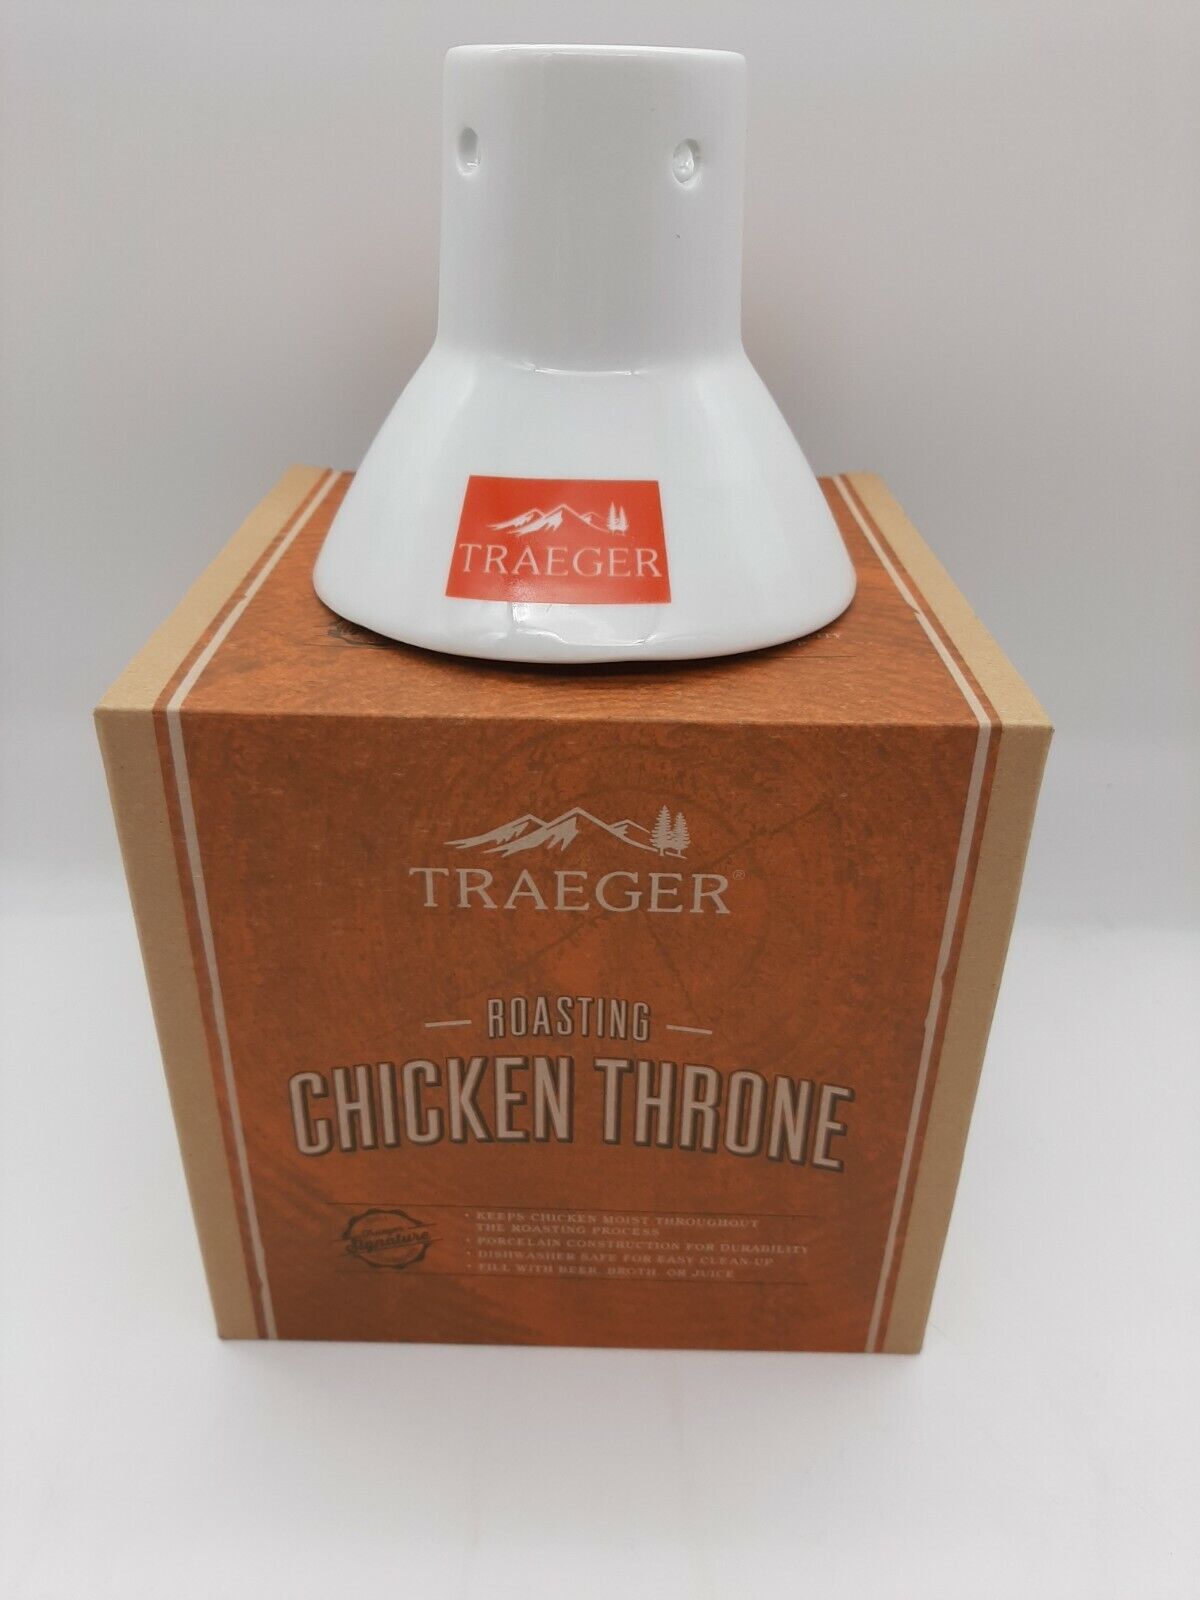 Traeger Chicken Throne with Box